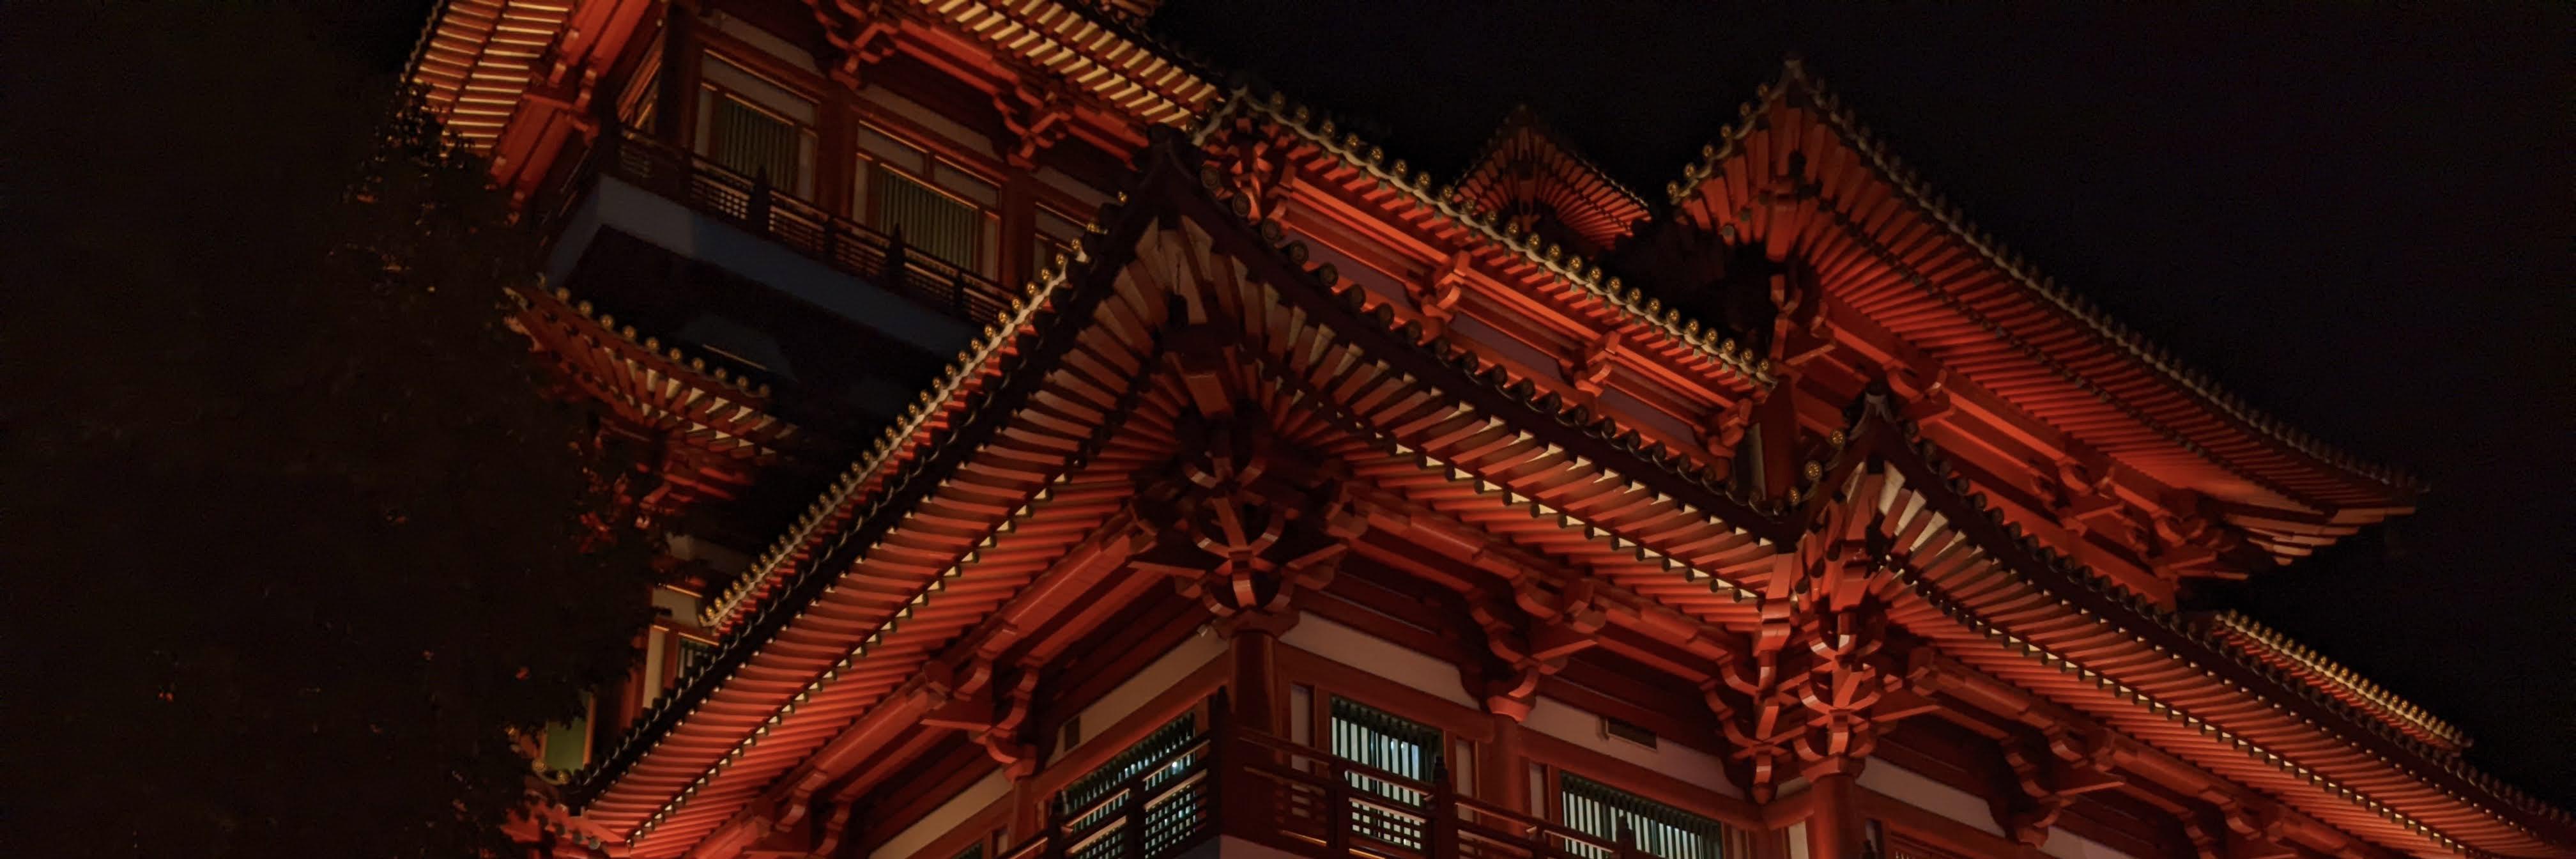 Buddha Tooth Relic Temple in Chinatown, Singapore at night.